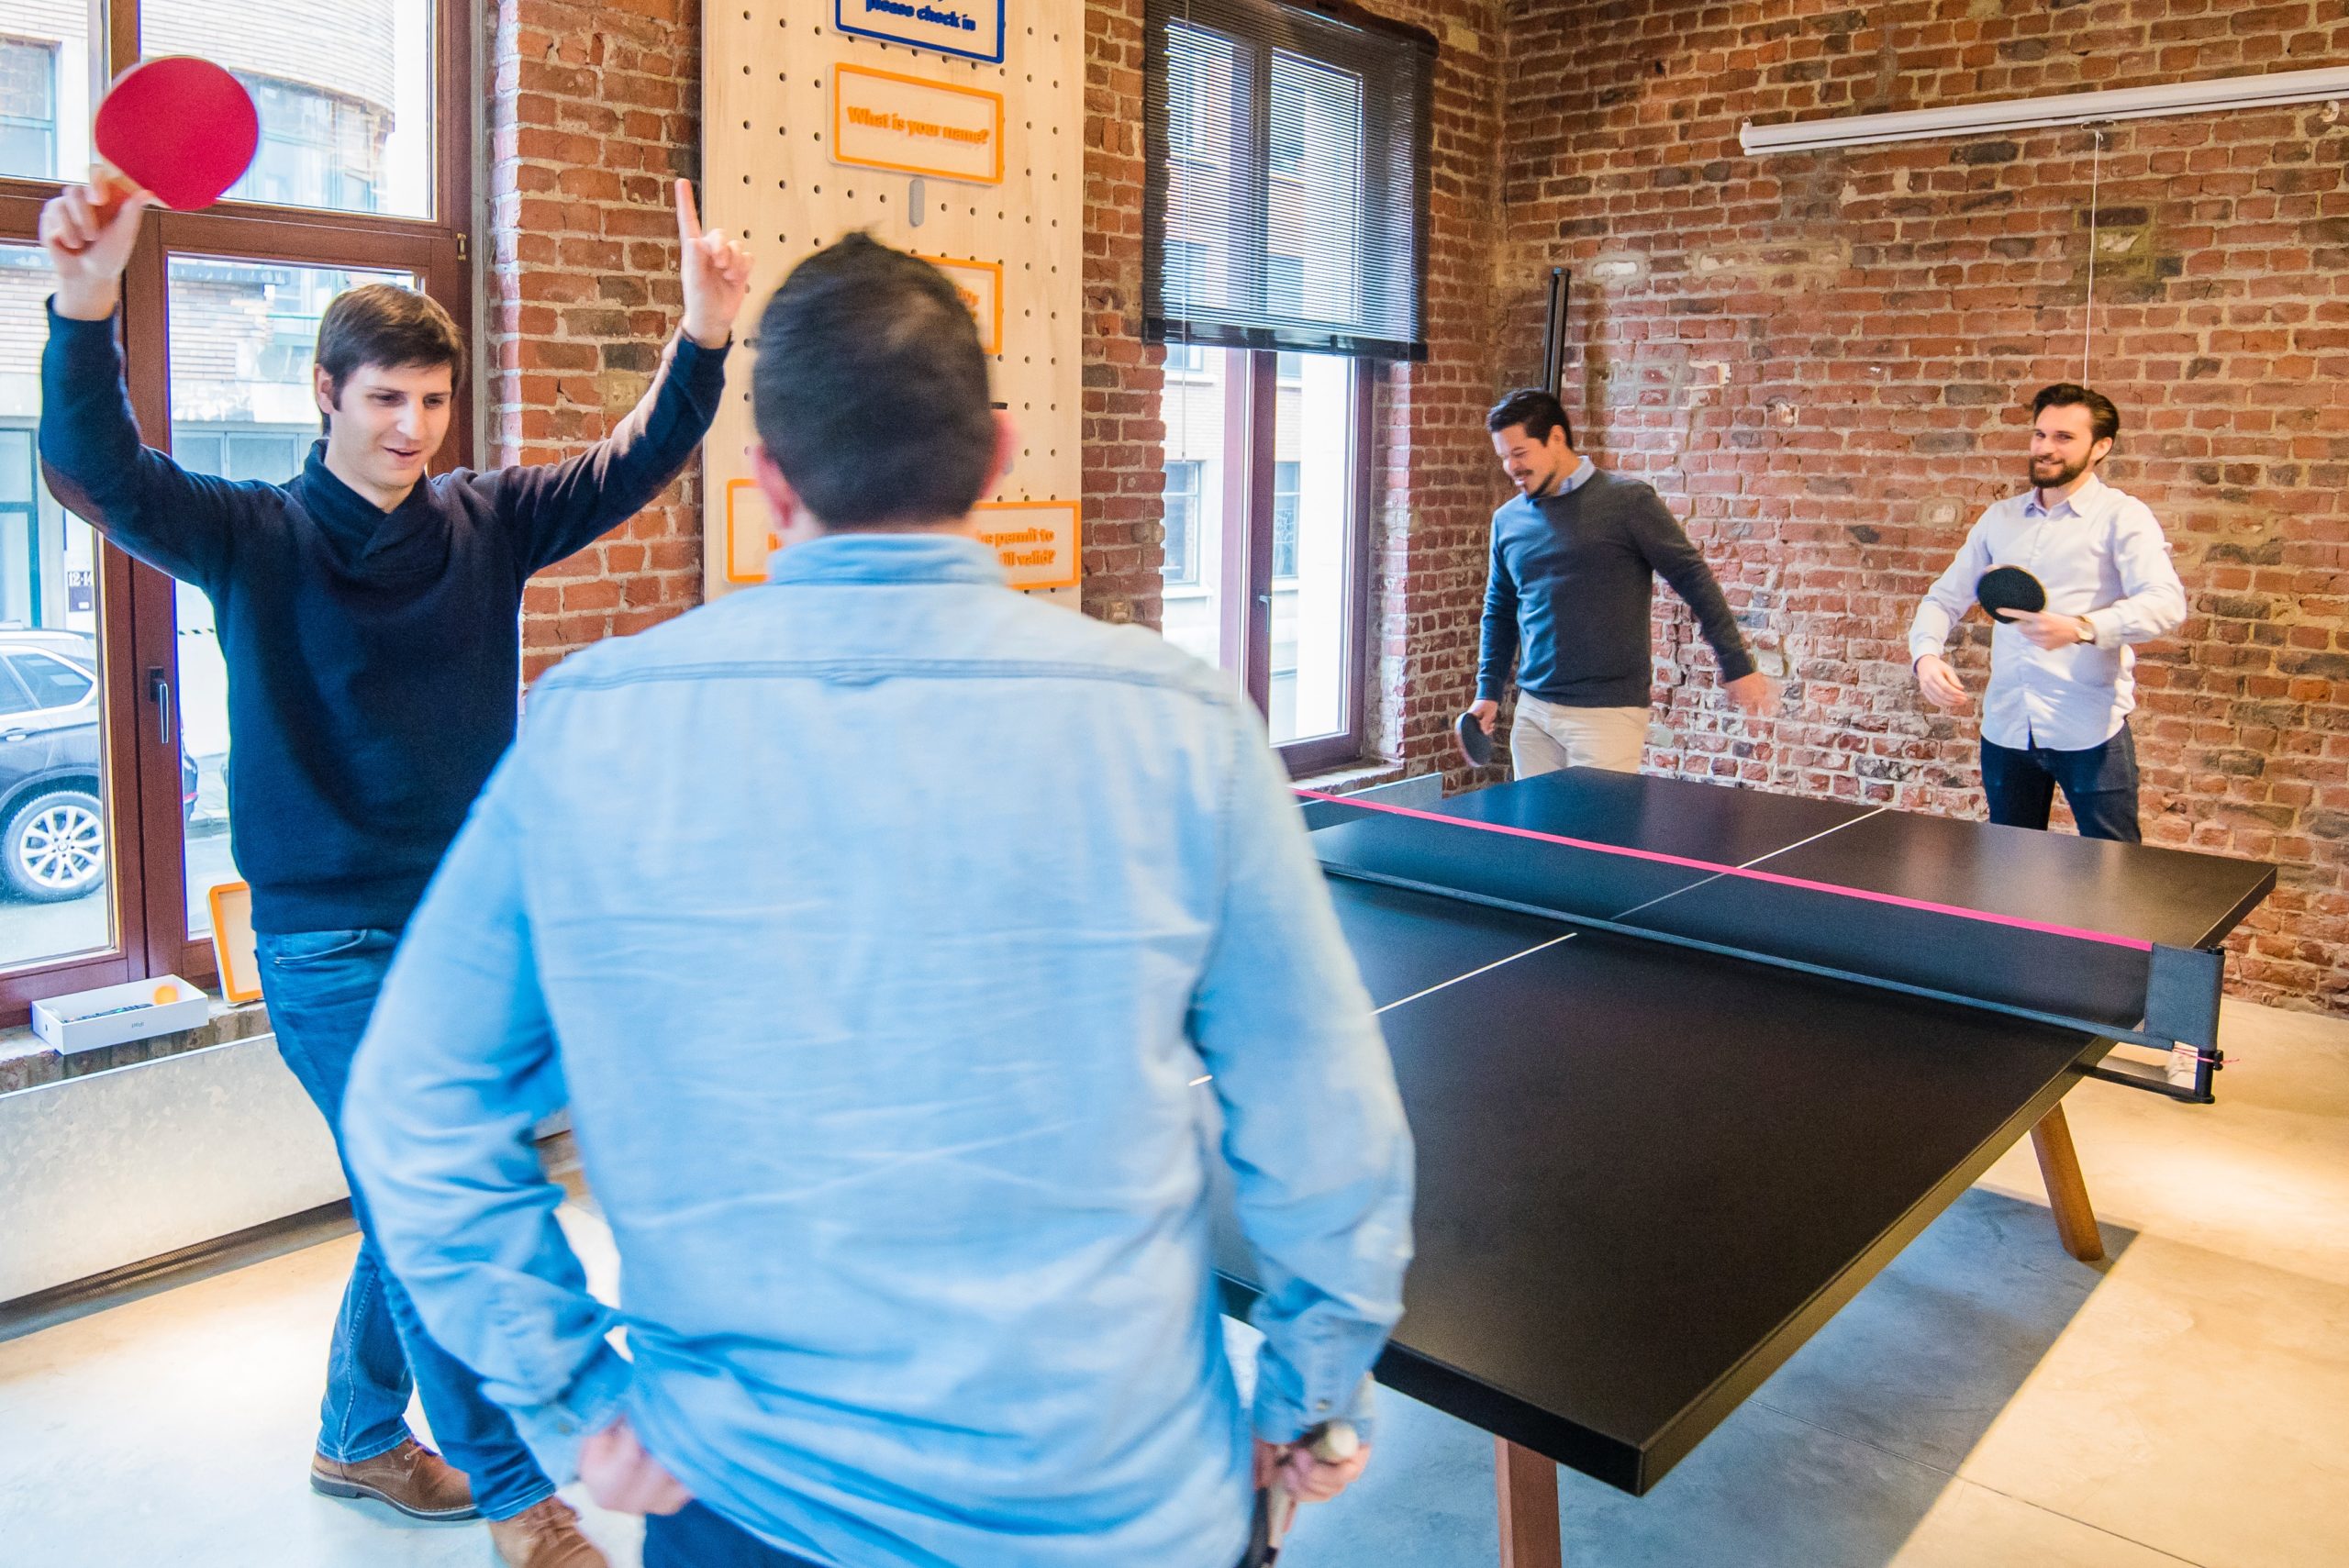 A group of people play ping pong at their office ping pong table